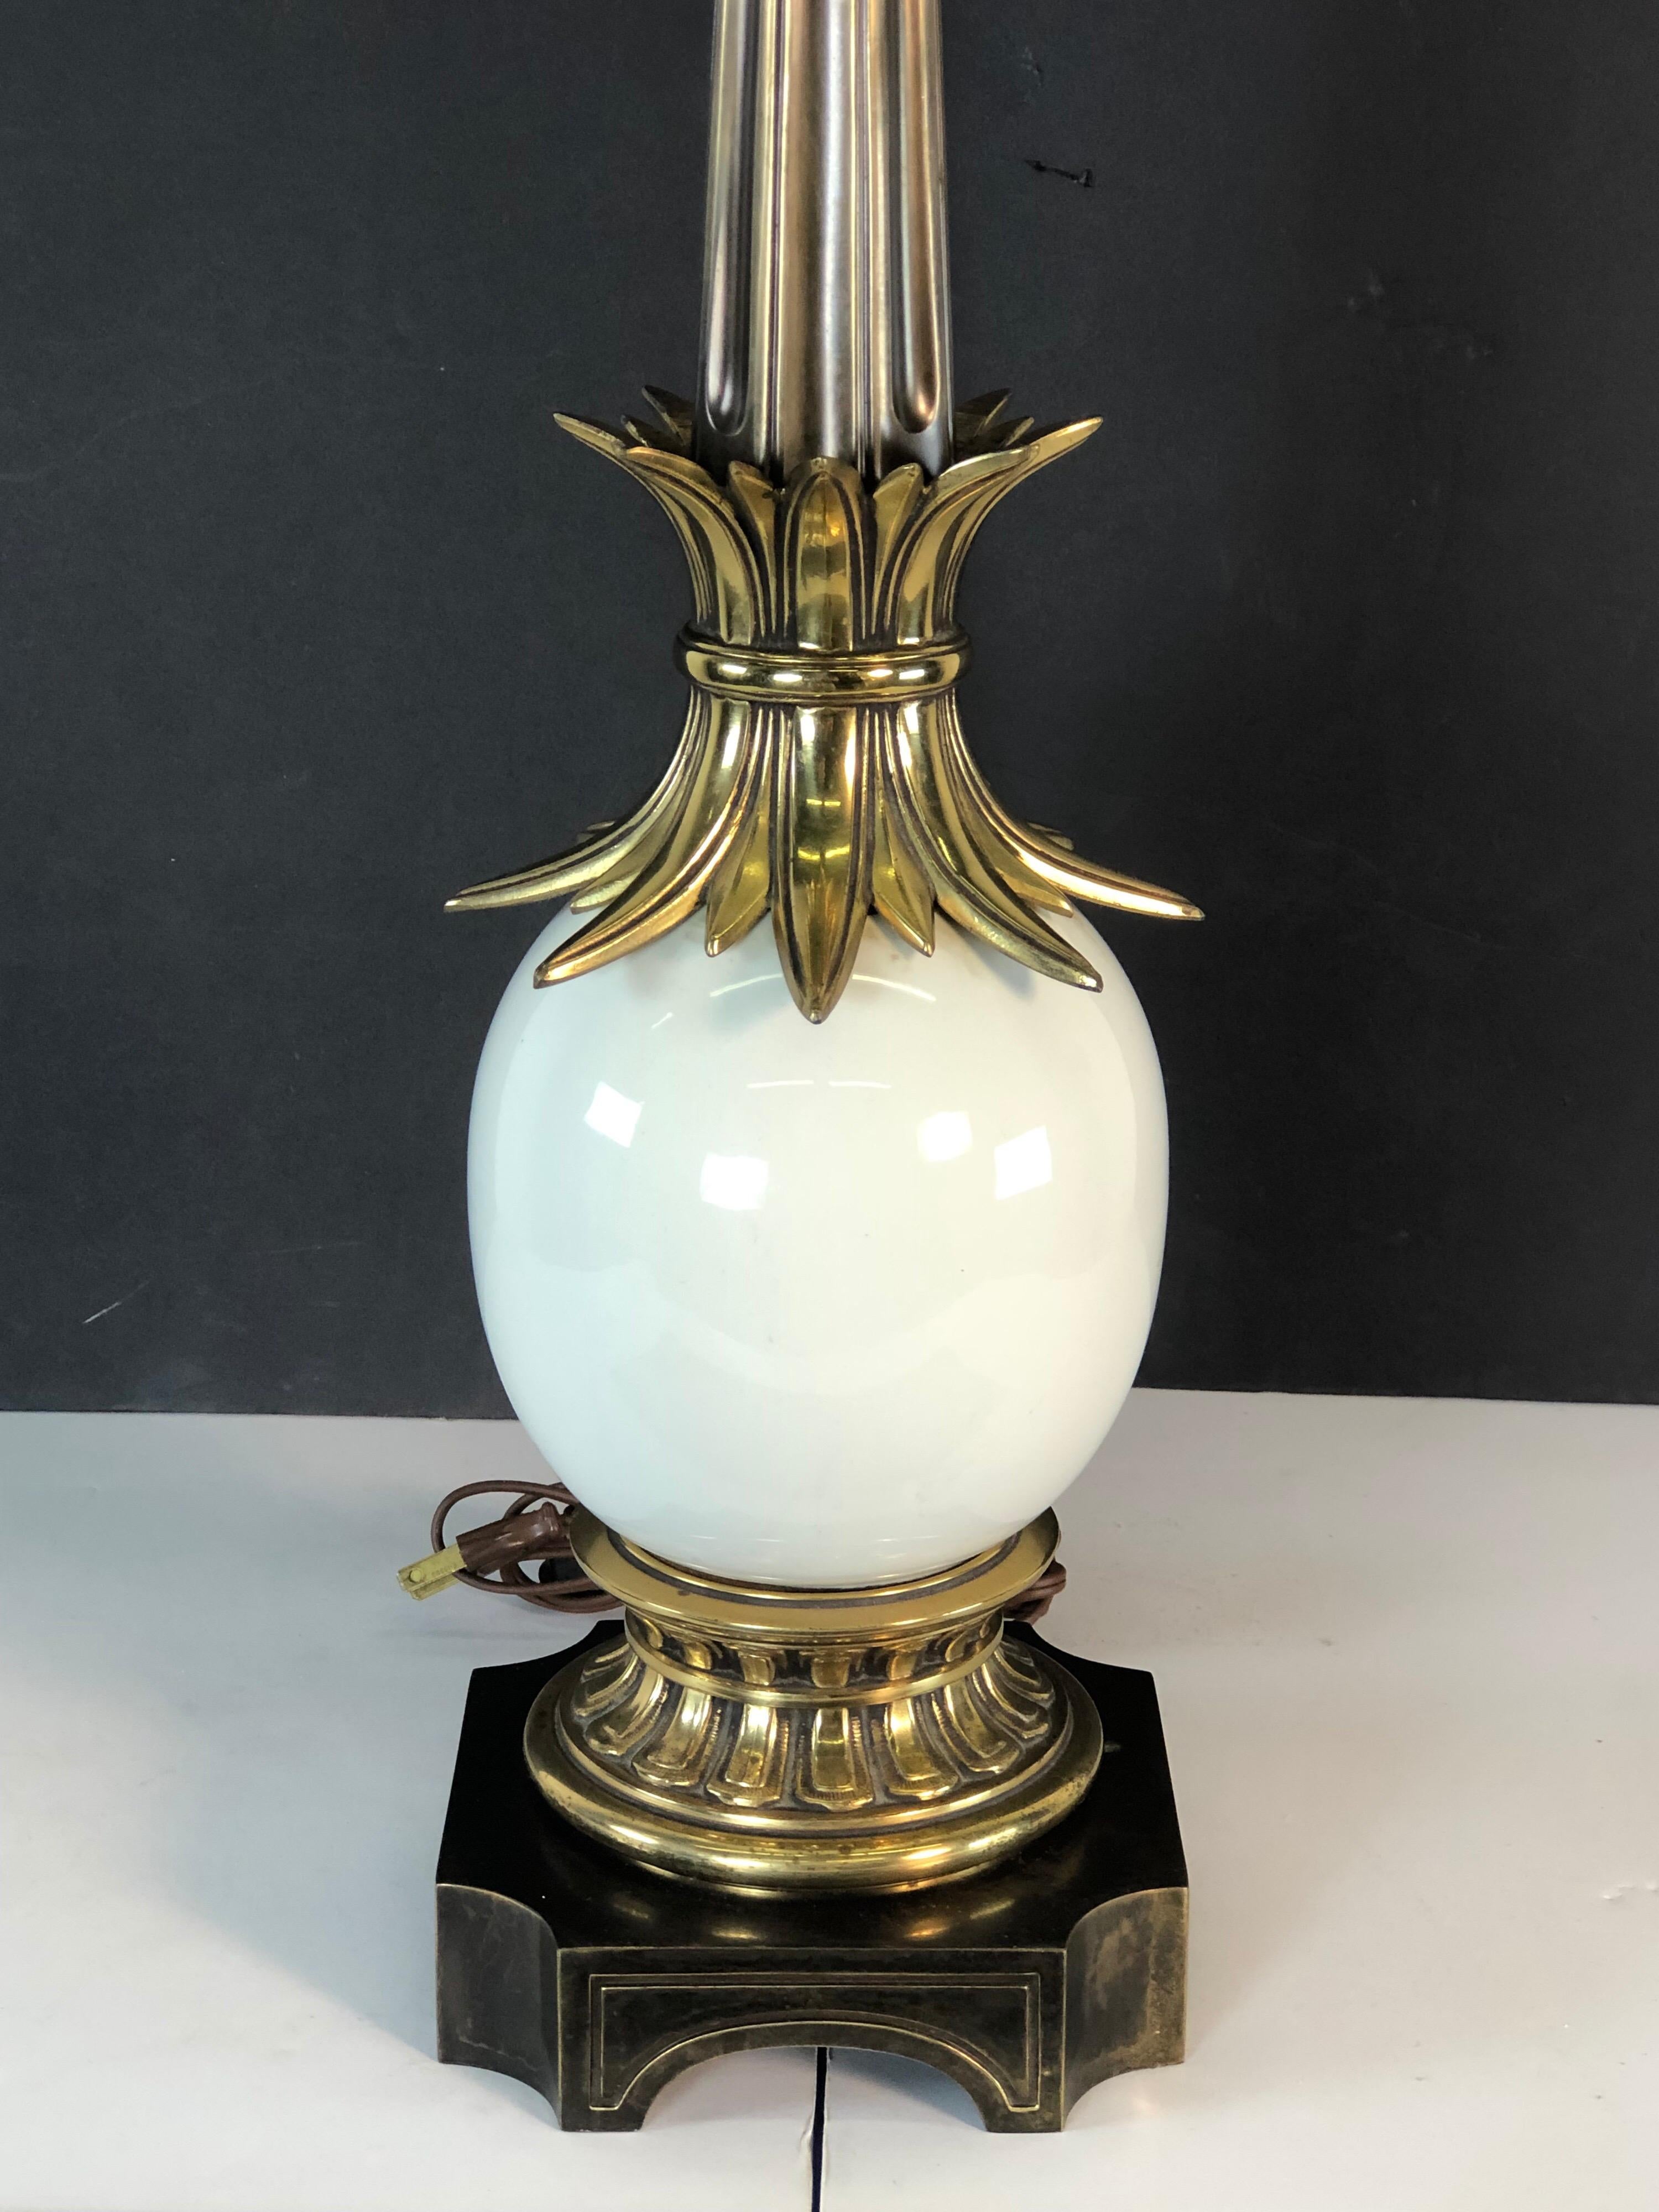 1970s Stiffel brass and ceramic table lamp on a bronze base with an accented leaf design. The lamp is wired for the US and in working condition. Socket, 17.5” height. Harp, 4” diameter x 9” height. The shade is not included.